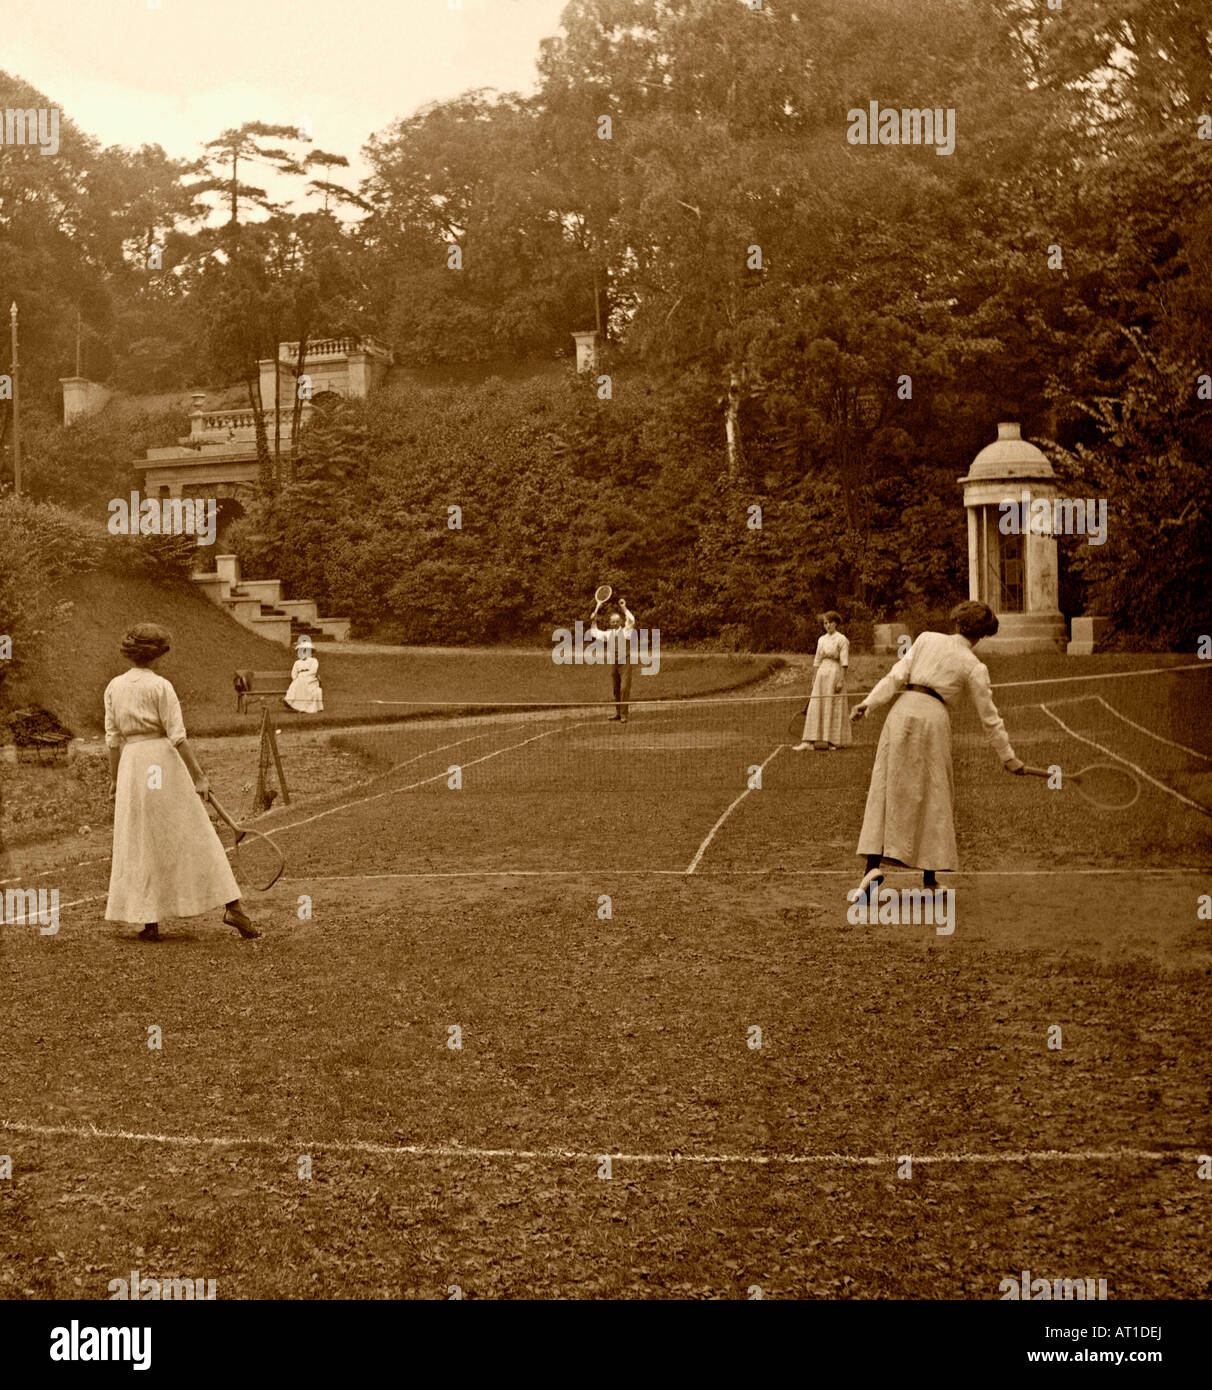 A genteel game of tennis in the UK c.1900. A man and 3 ladies play in a country house/stately home on an uneven grass court – an upper class pastime. Stock Photo